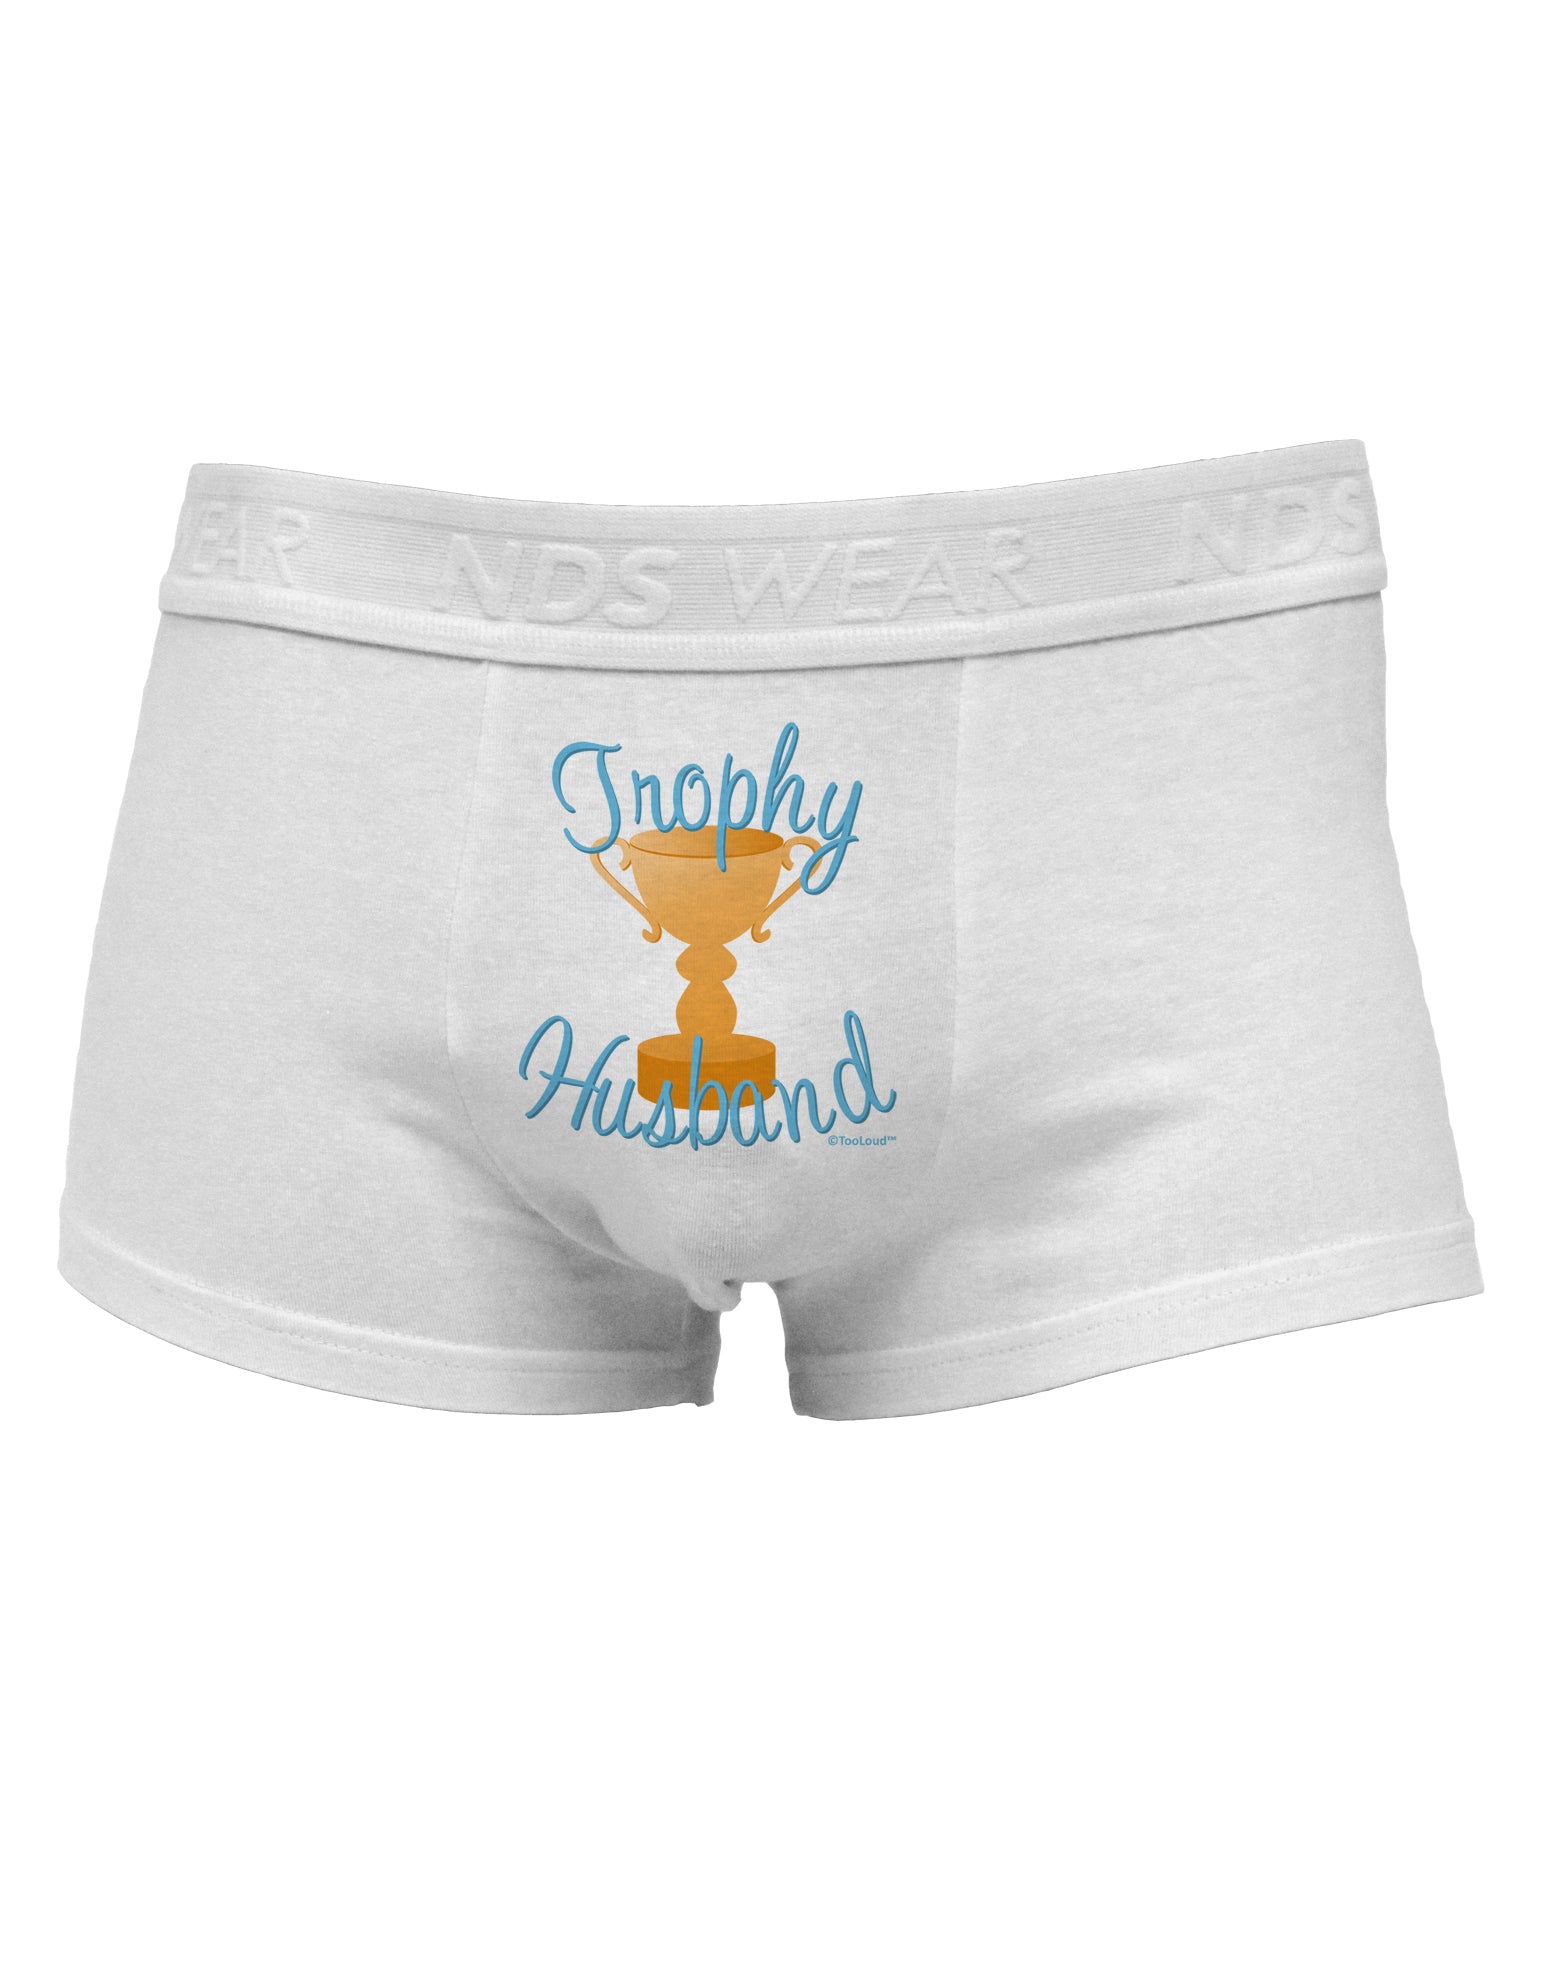 Trophy Husband DesignMens Cotton Trunk Underwear by TooLoud